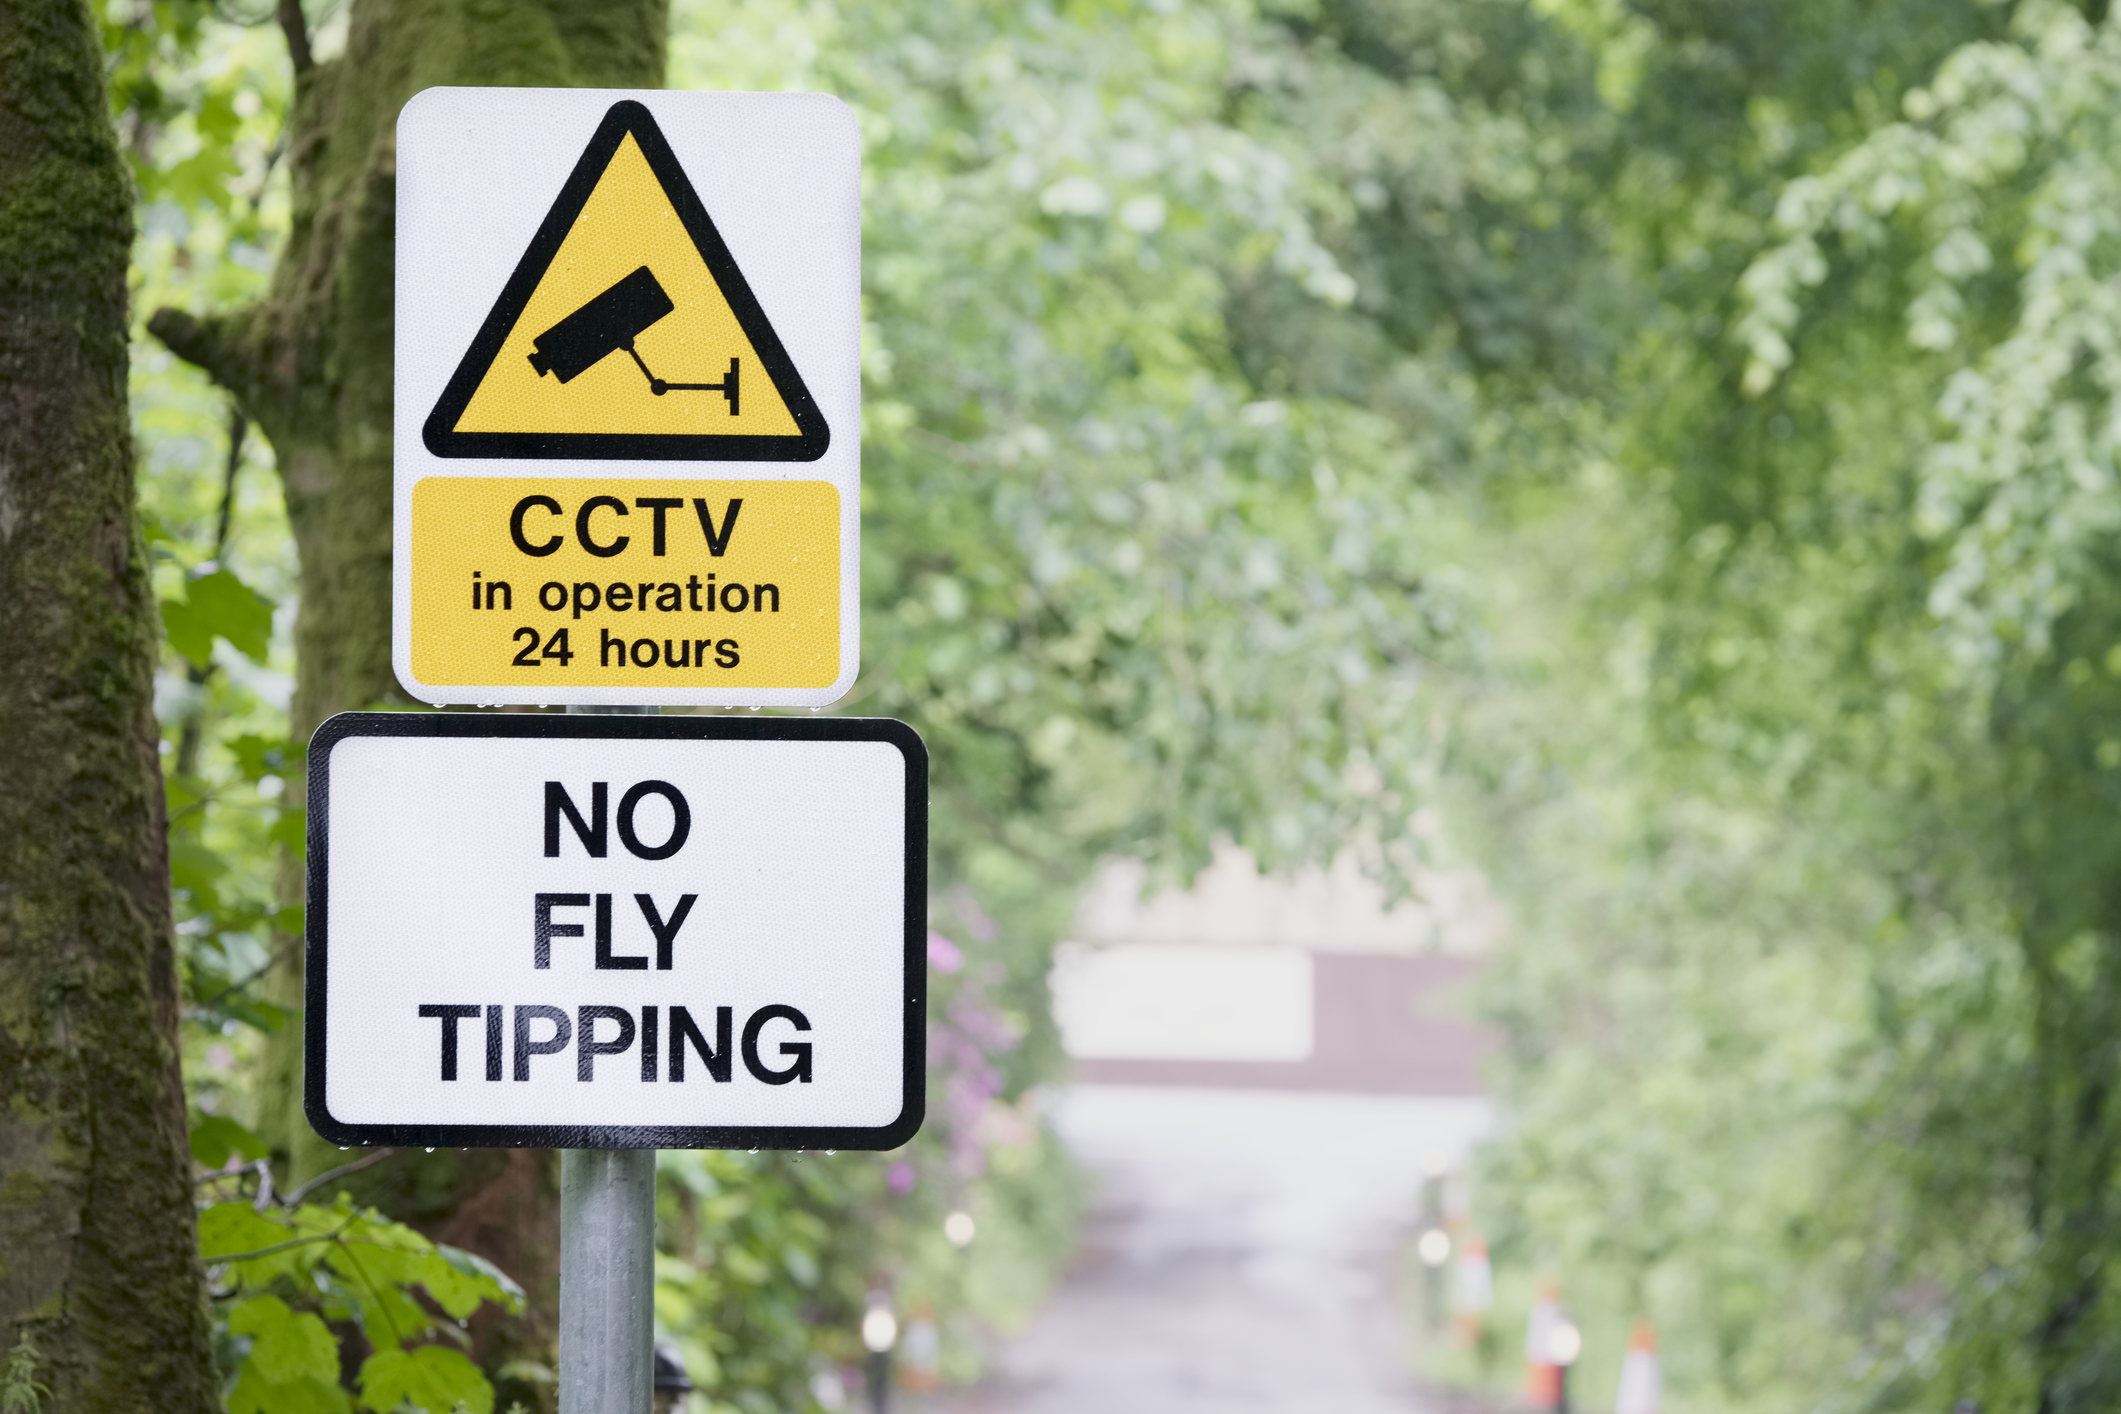 No fly tipping sign with CCTV sign against background of tree lined country road